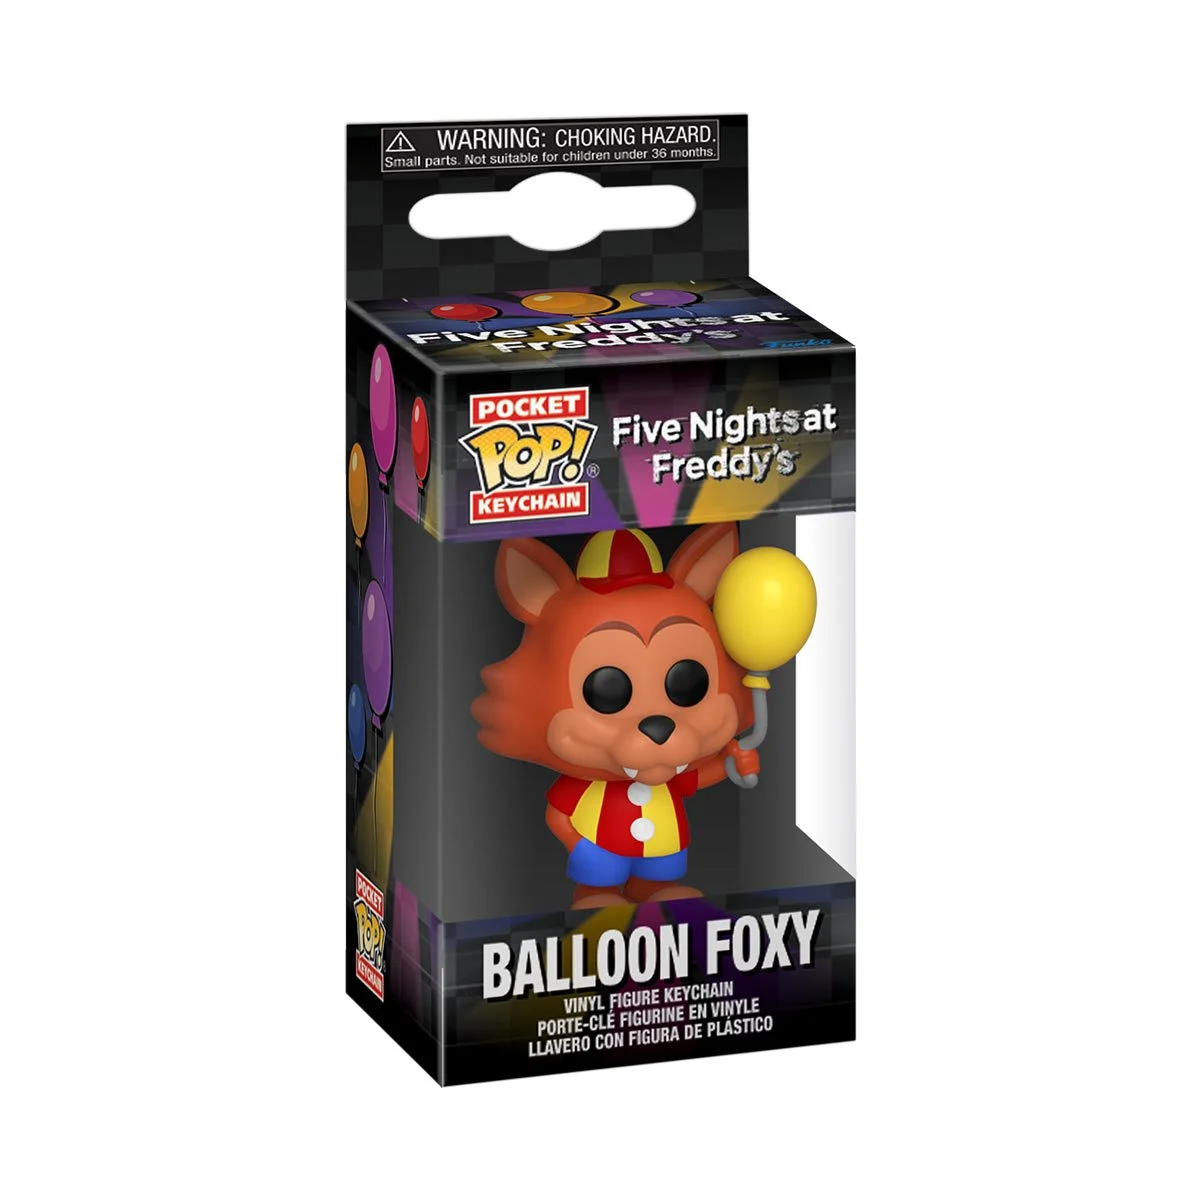 FNAF BALLOON CIRCUS MYSTERY MINI UNBOXING AND COLLECTION! - 2023 FNaF Funko  Unboxing Review 